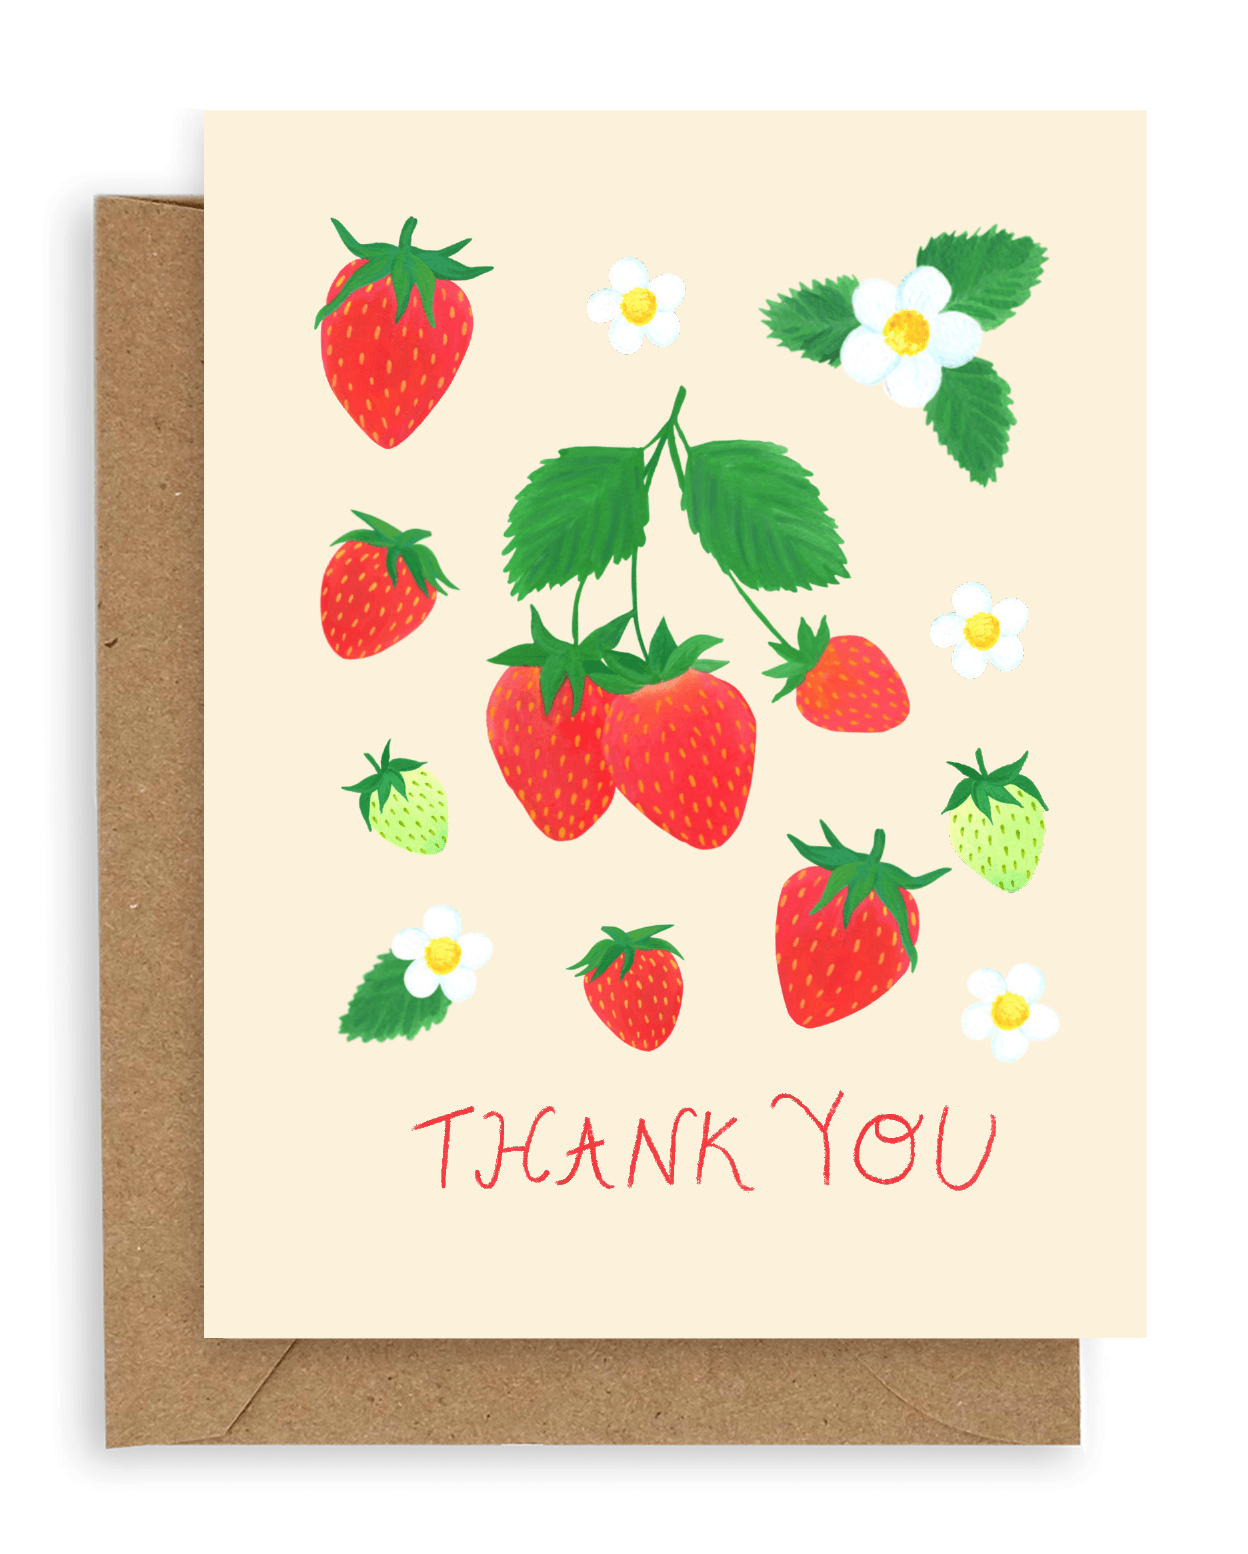 Red and green strawberries with white flowers arranged above the words &quot;thank you&quot; in red font printed on a cream background. Shown with kraft envelope.